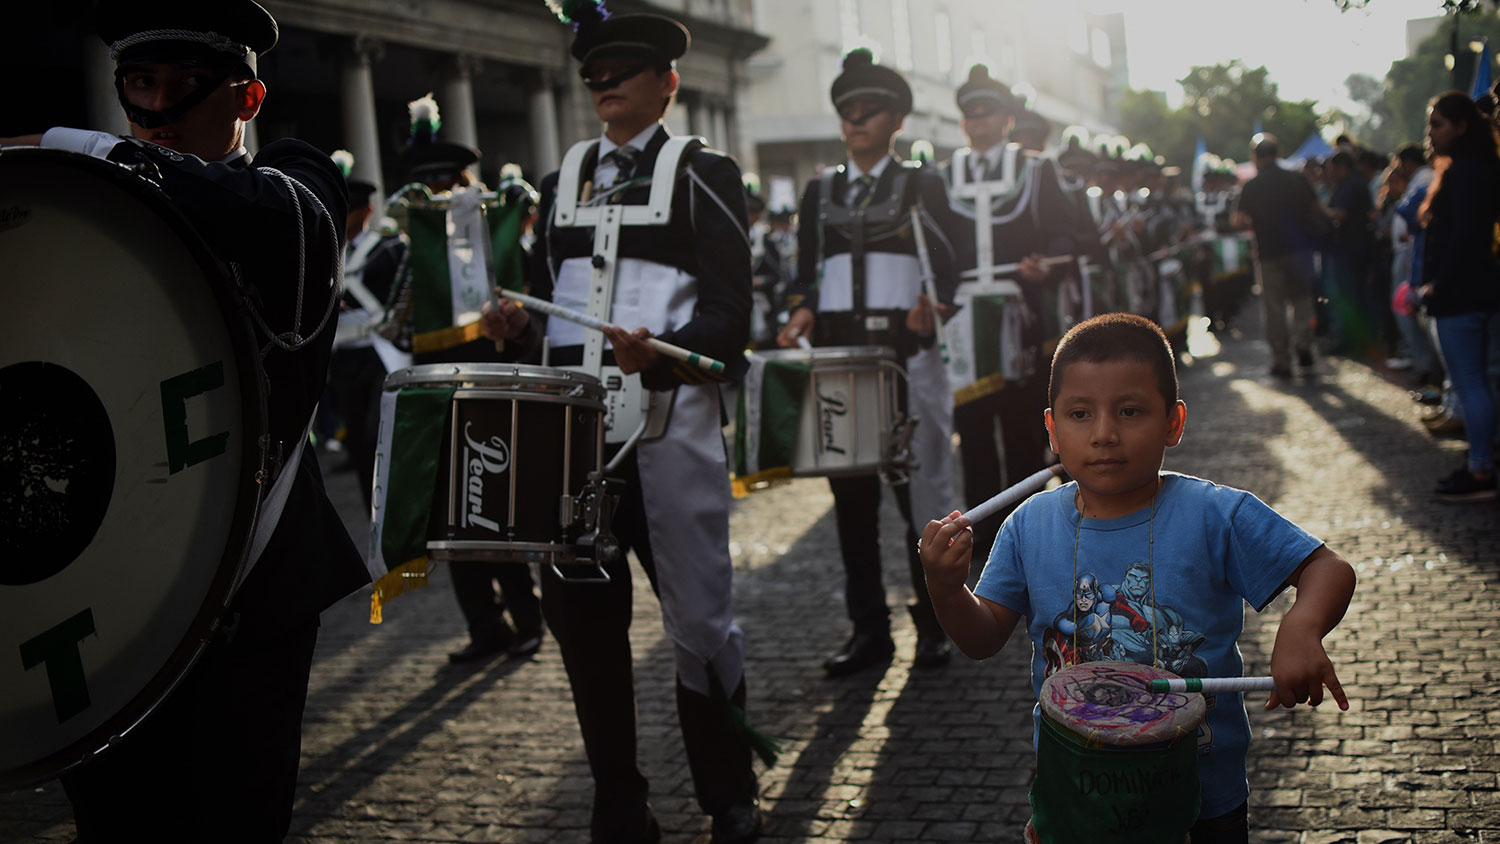 Students perform in a parade during celebrations for Guatemala's 195th independence day in Guatemala City on Sept. 14, 2016.
